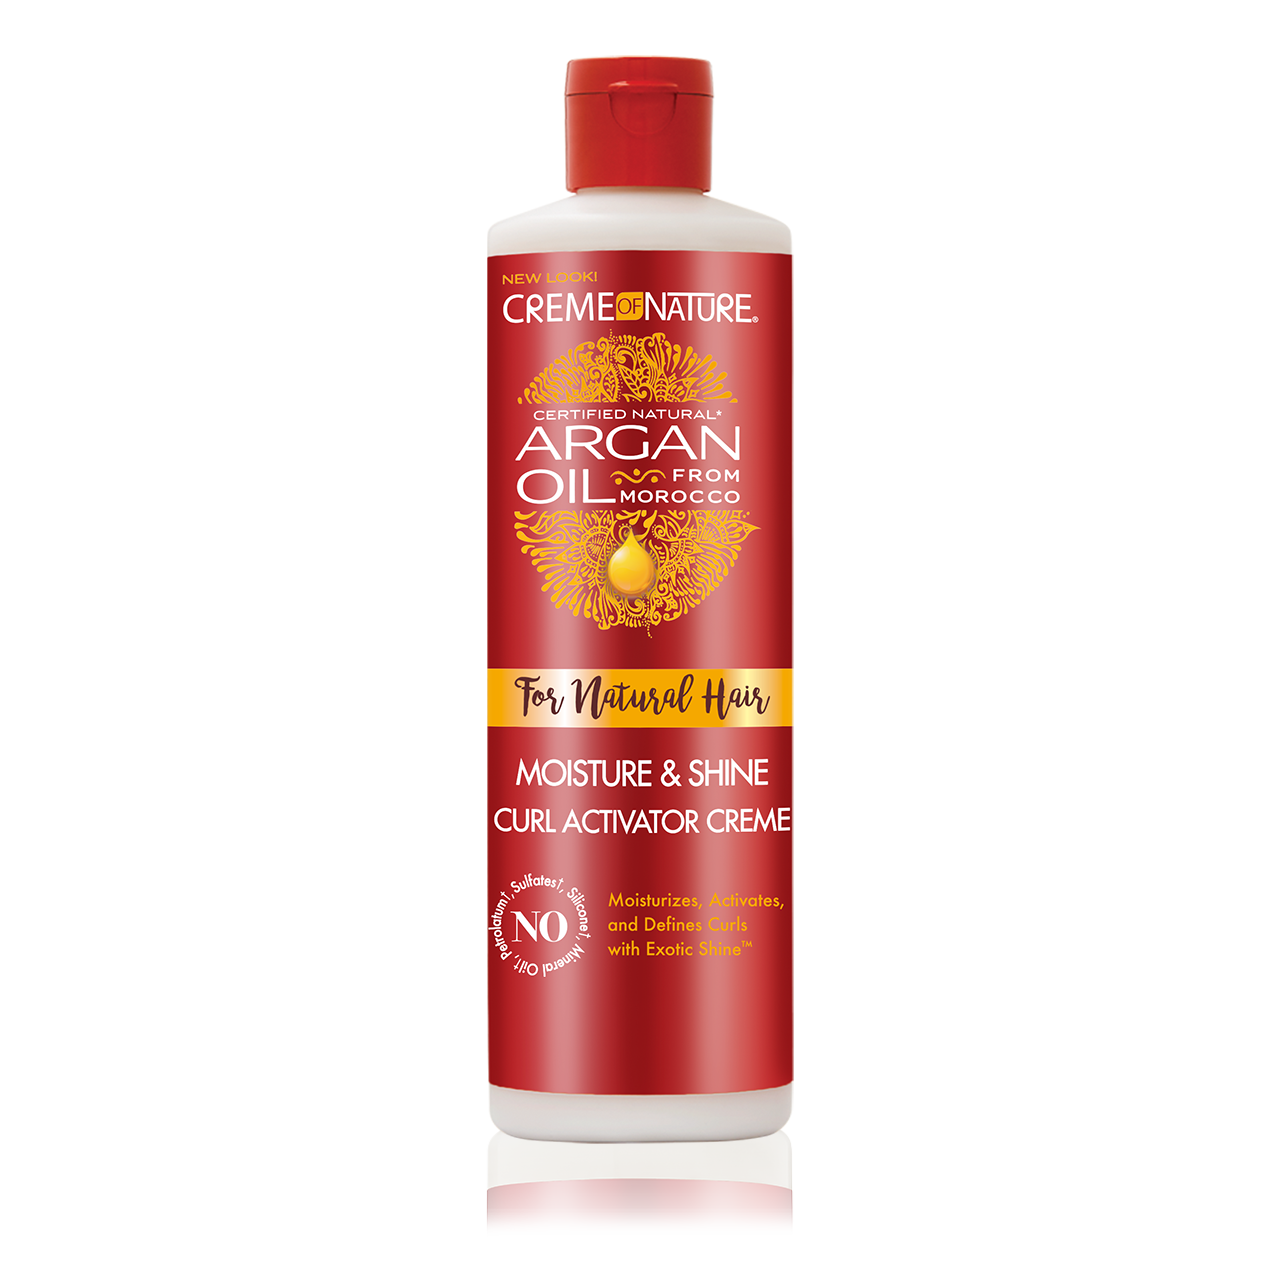 Argan Oil from Morocco for Natural Hair Moisture Shine Curl Activator Creme